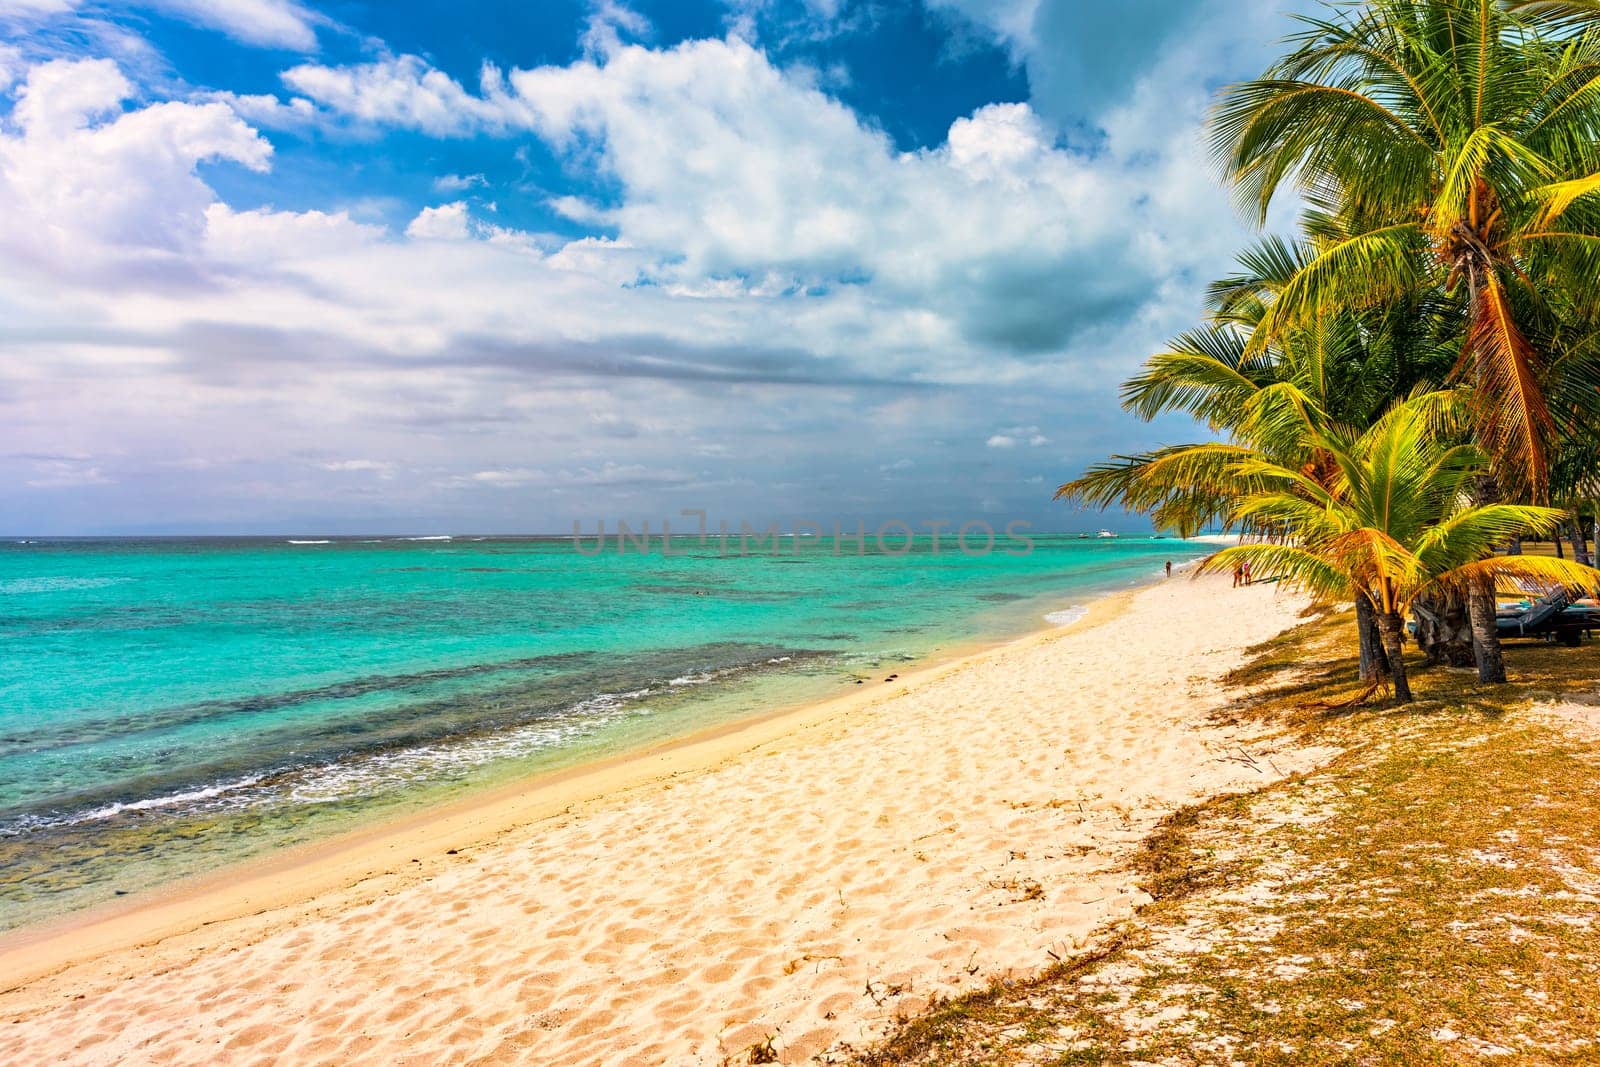 Tropical beach scenery, vacation in paradise island Mauritius. Dream exotic island, tropical paradise. Best beaches of Mauritius island, luxury resorts of Mauritius, Indian Ocean, Africa.